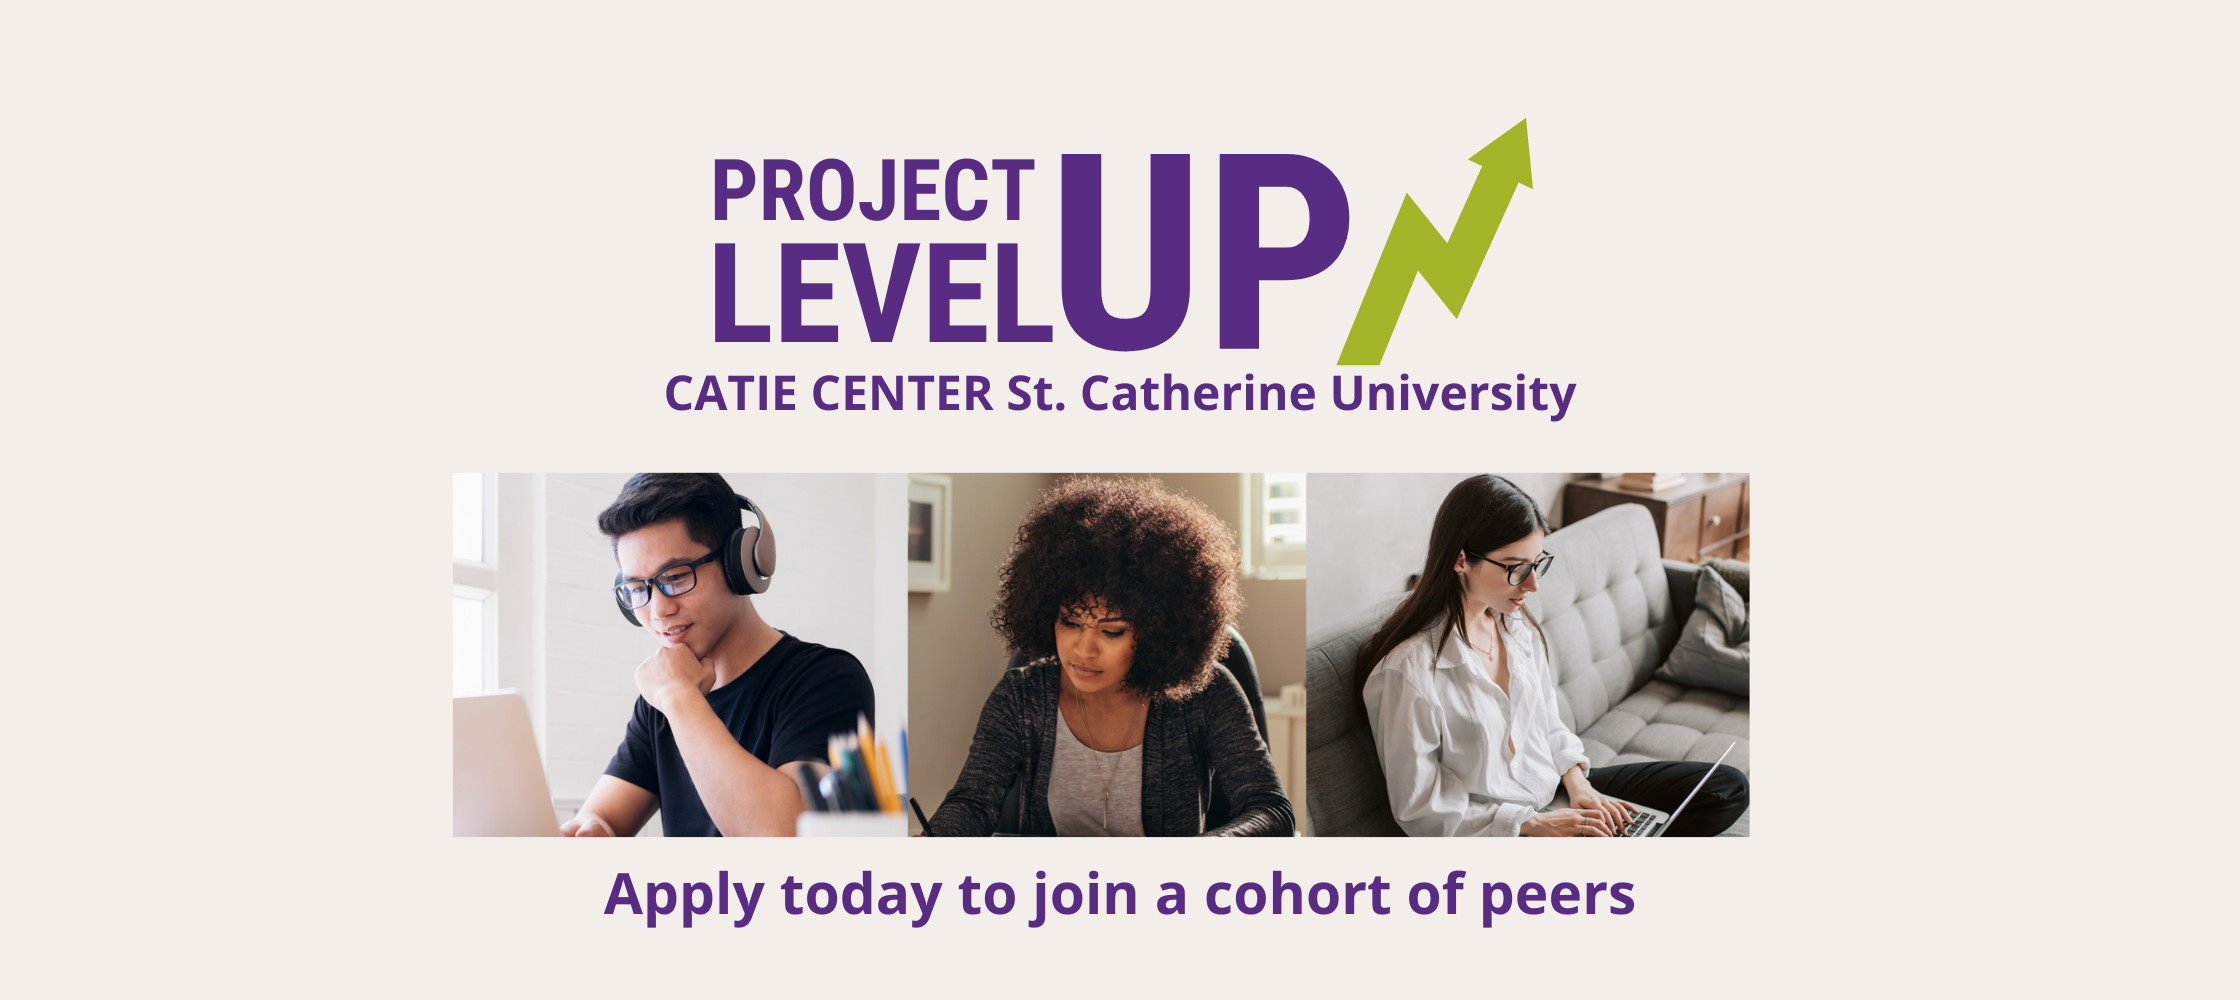 Program logo for Level Up. A collage of images shows diverse individuals on their laptops, reading or writing. Under the collage is text Apply now to join a cohort of peers.